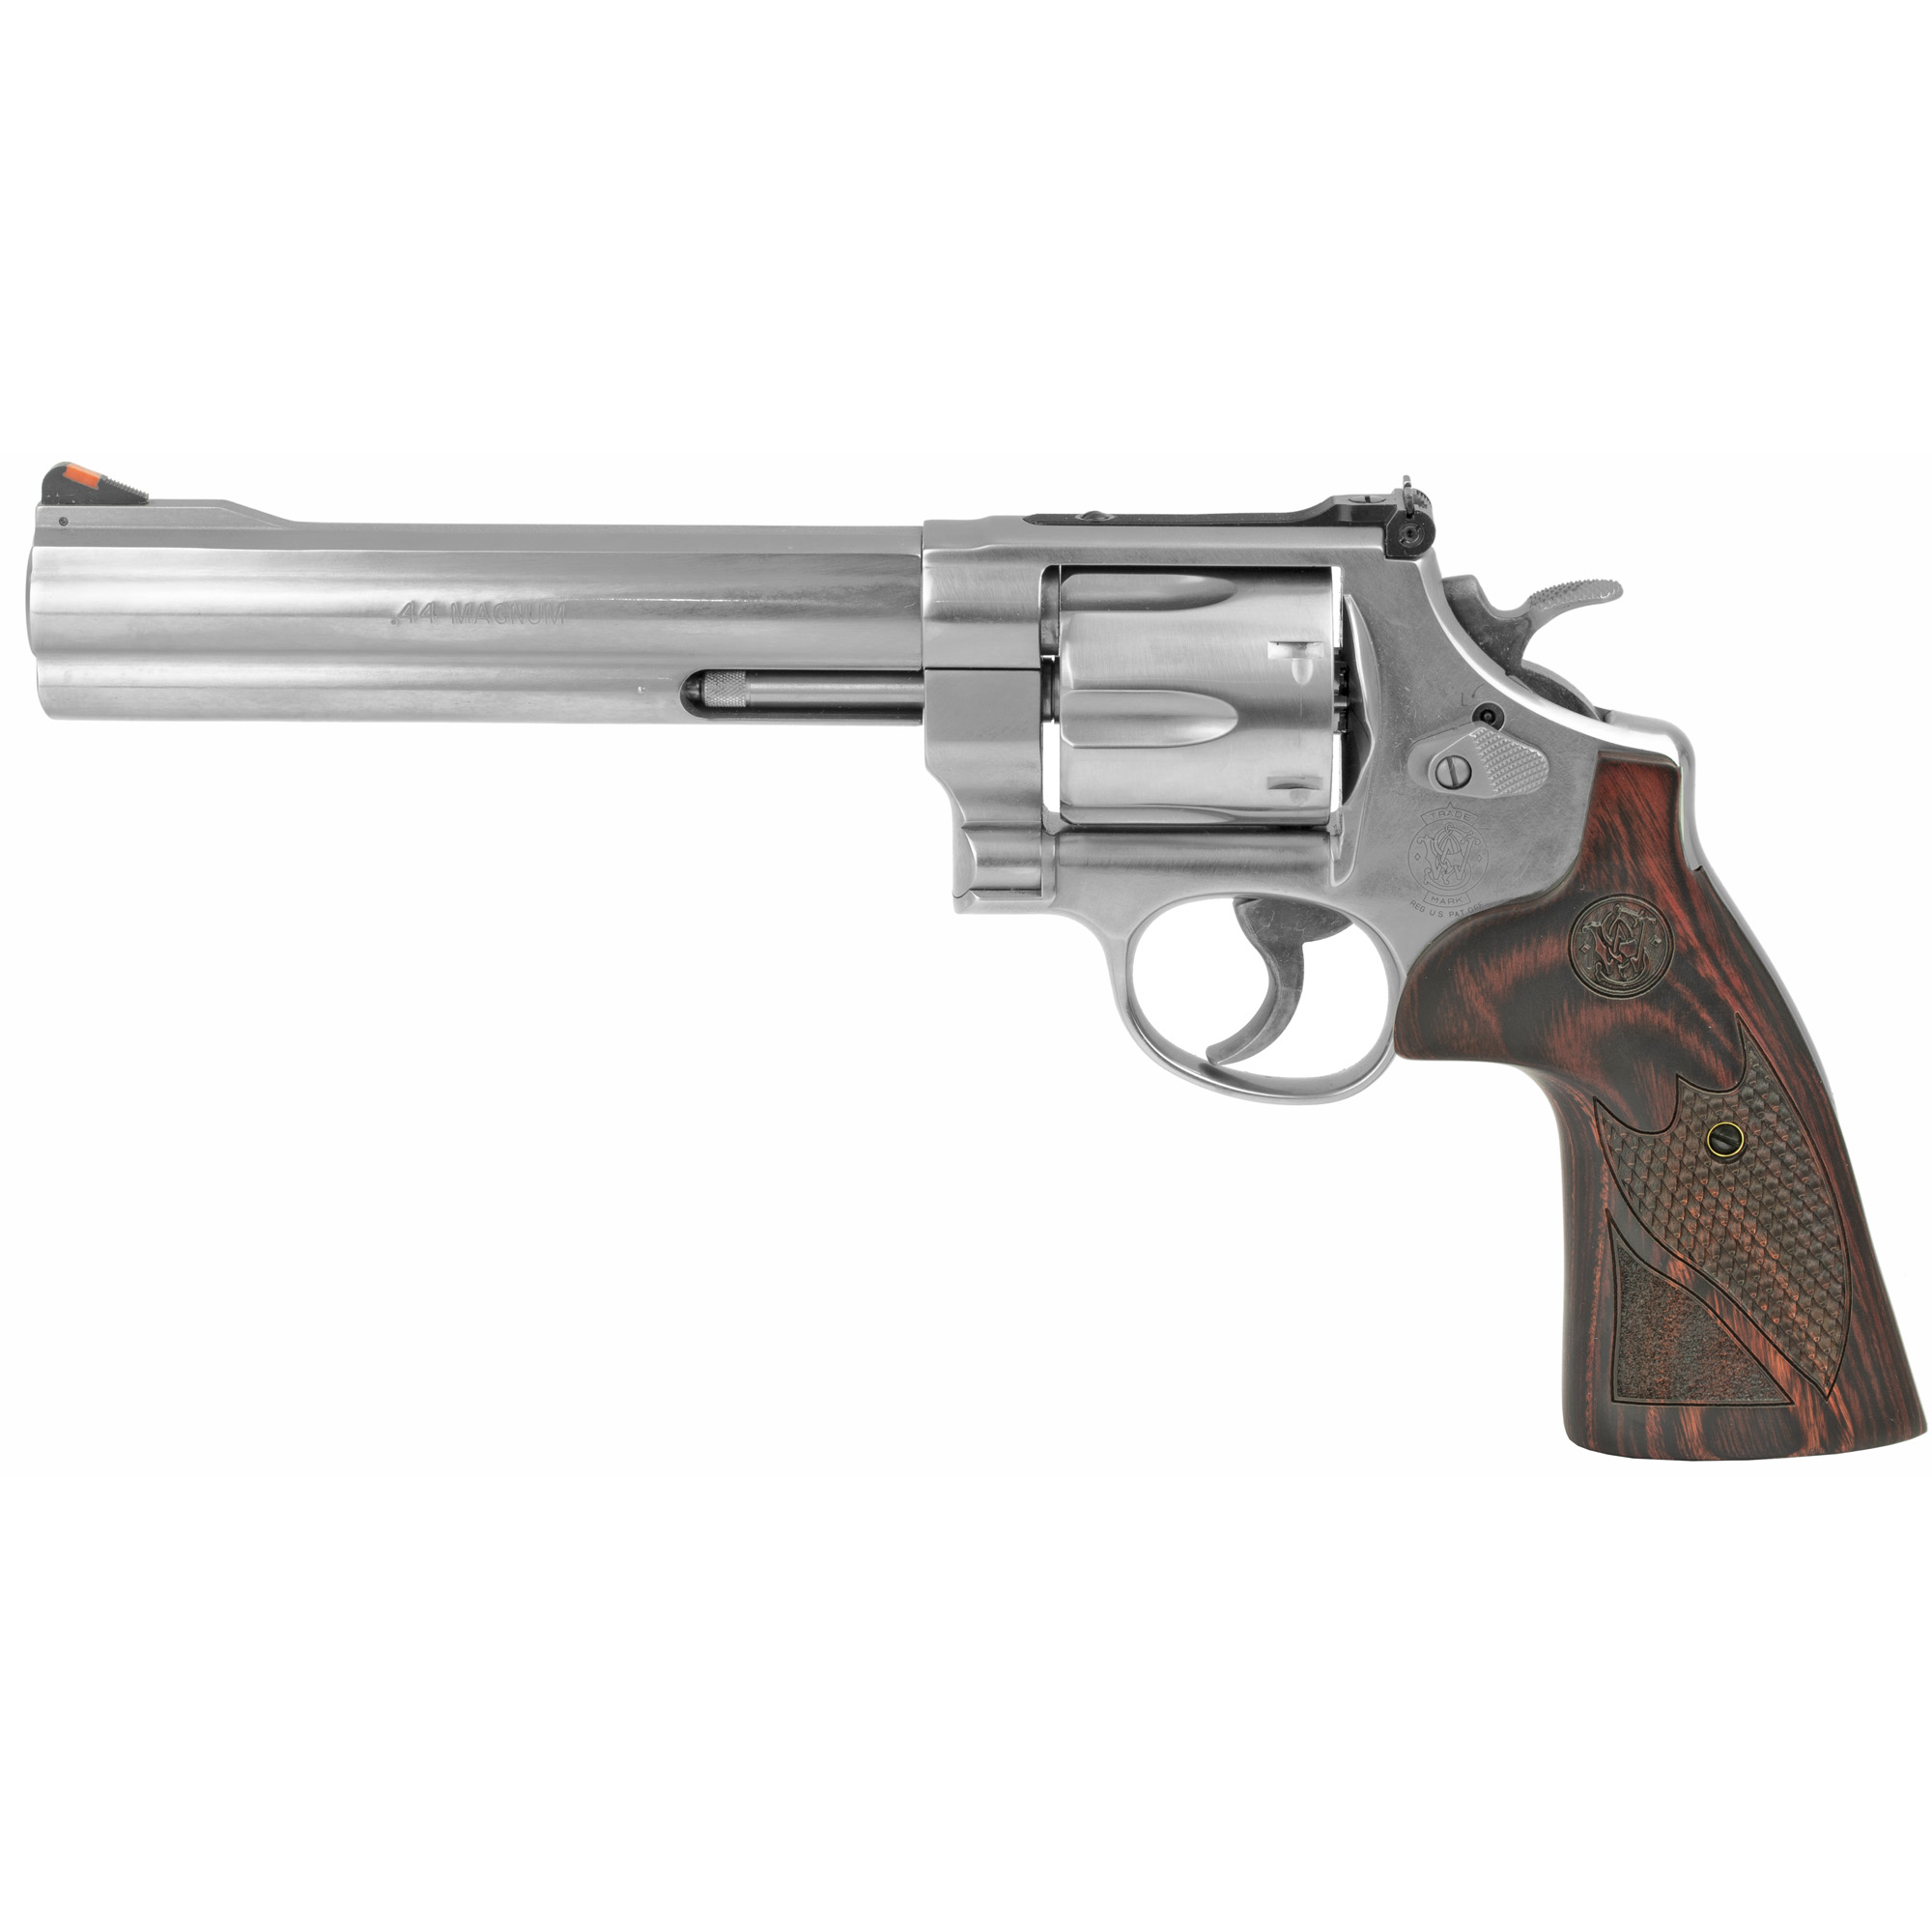 S&W 629 DLX 44MAG 6.5 STS 6RD WD